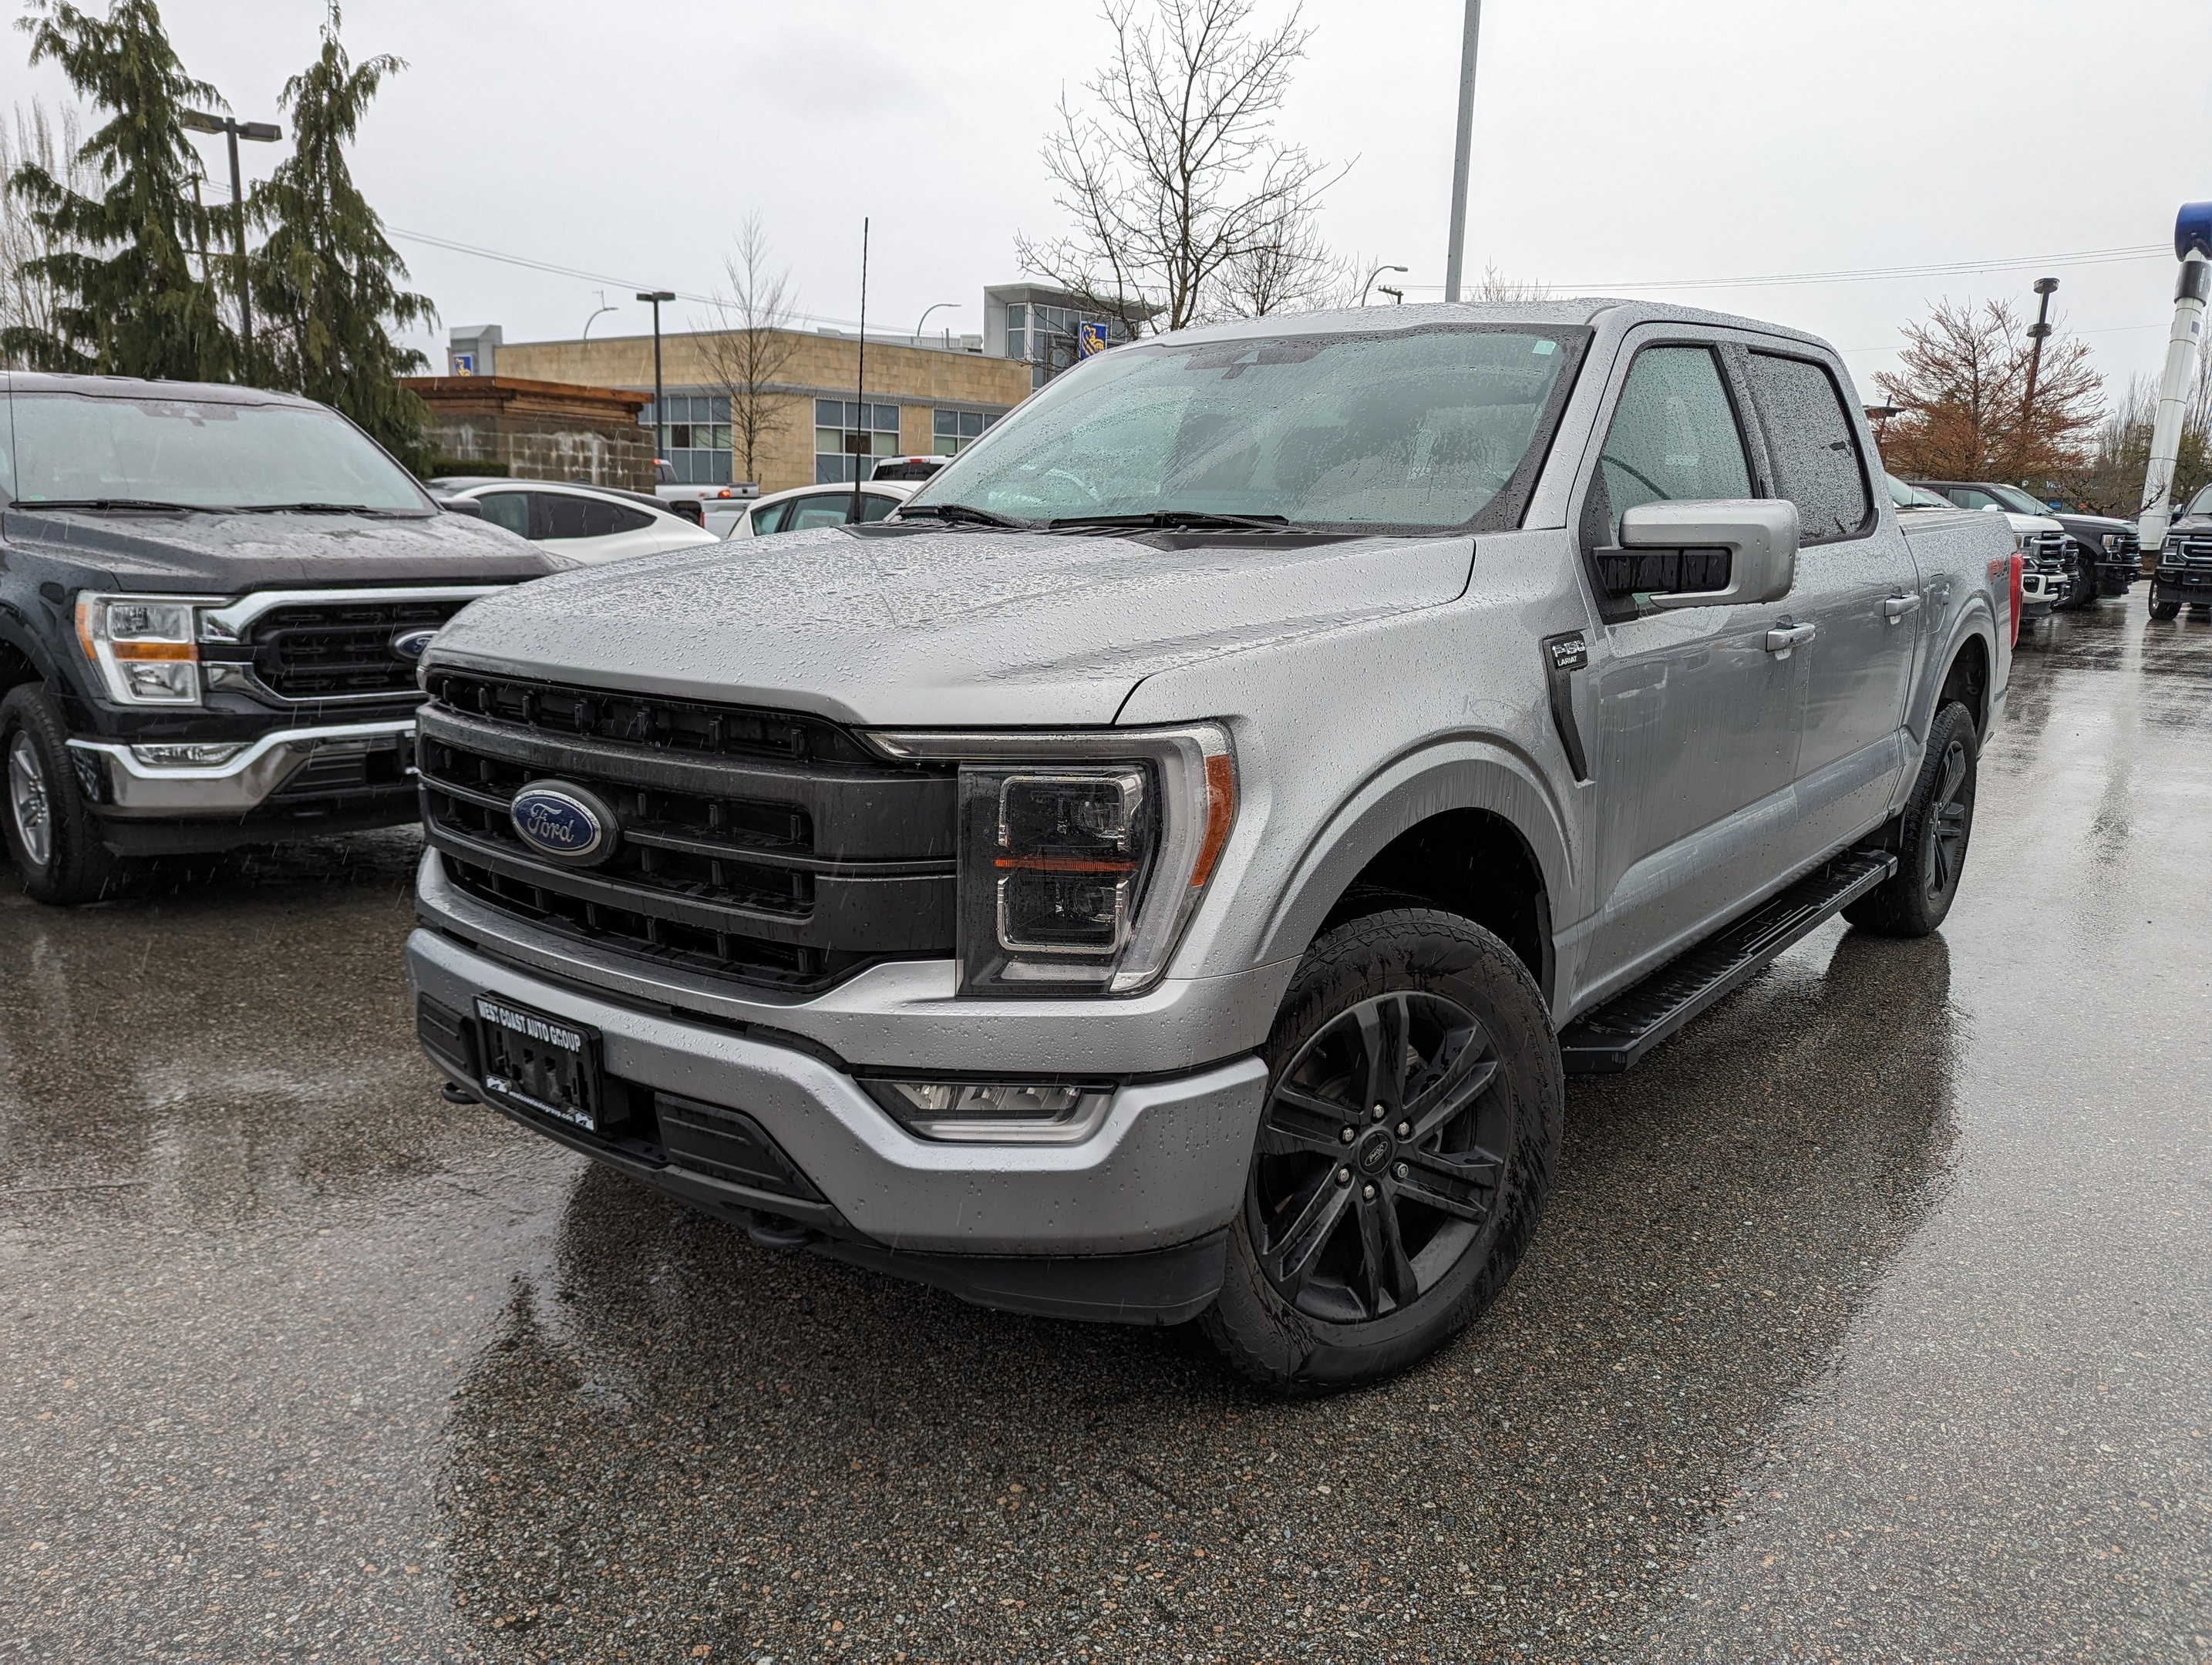 2021 Ford F-150 Sport - FX4 Off-Road Pkg, Twin Panel Moonroof